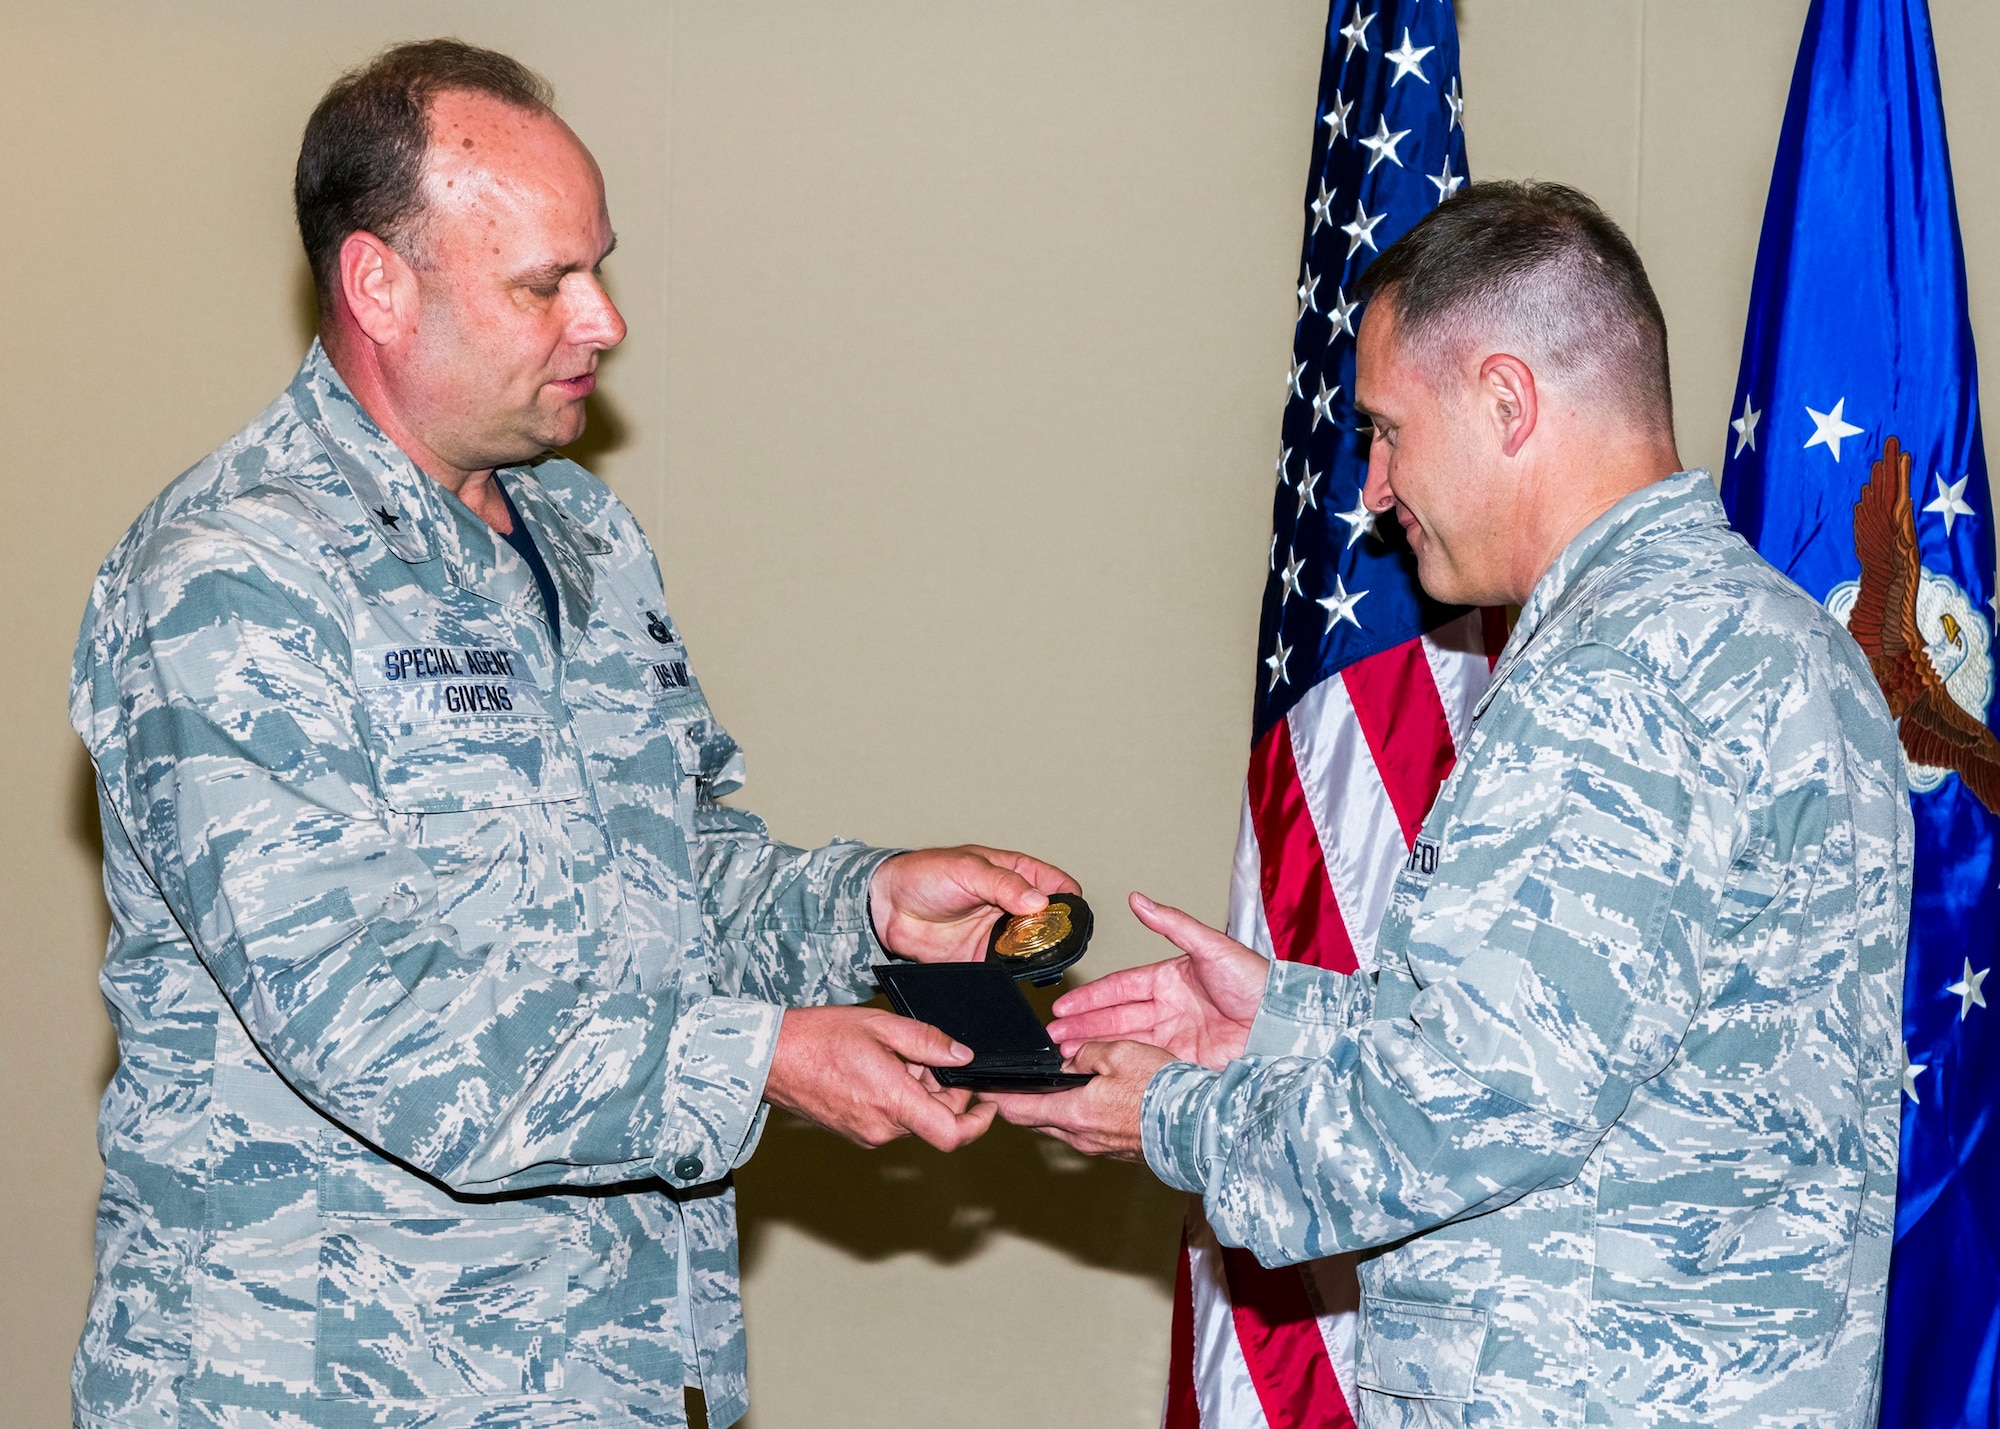 Air Force Office of Special Investigations Commander, Brig. Gen. Keith M. Givens welcomes his successor, Col. Kirk. B. Stabler by passing AFOSI Badge and Credential 1 to him May 16, 2017. Col. Stabler will lead the 69-year old law enforcement organization beginning May 18, 2017. (U.S. Air Force photo/Michael Hastings)